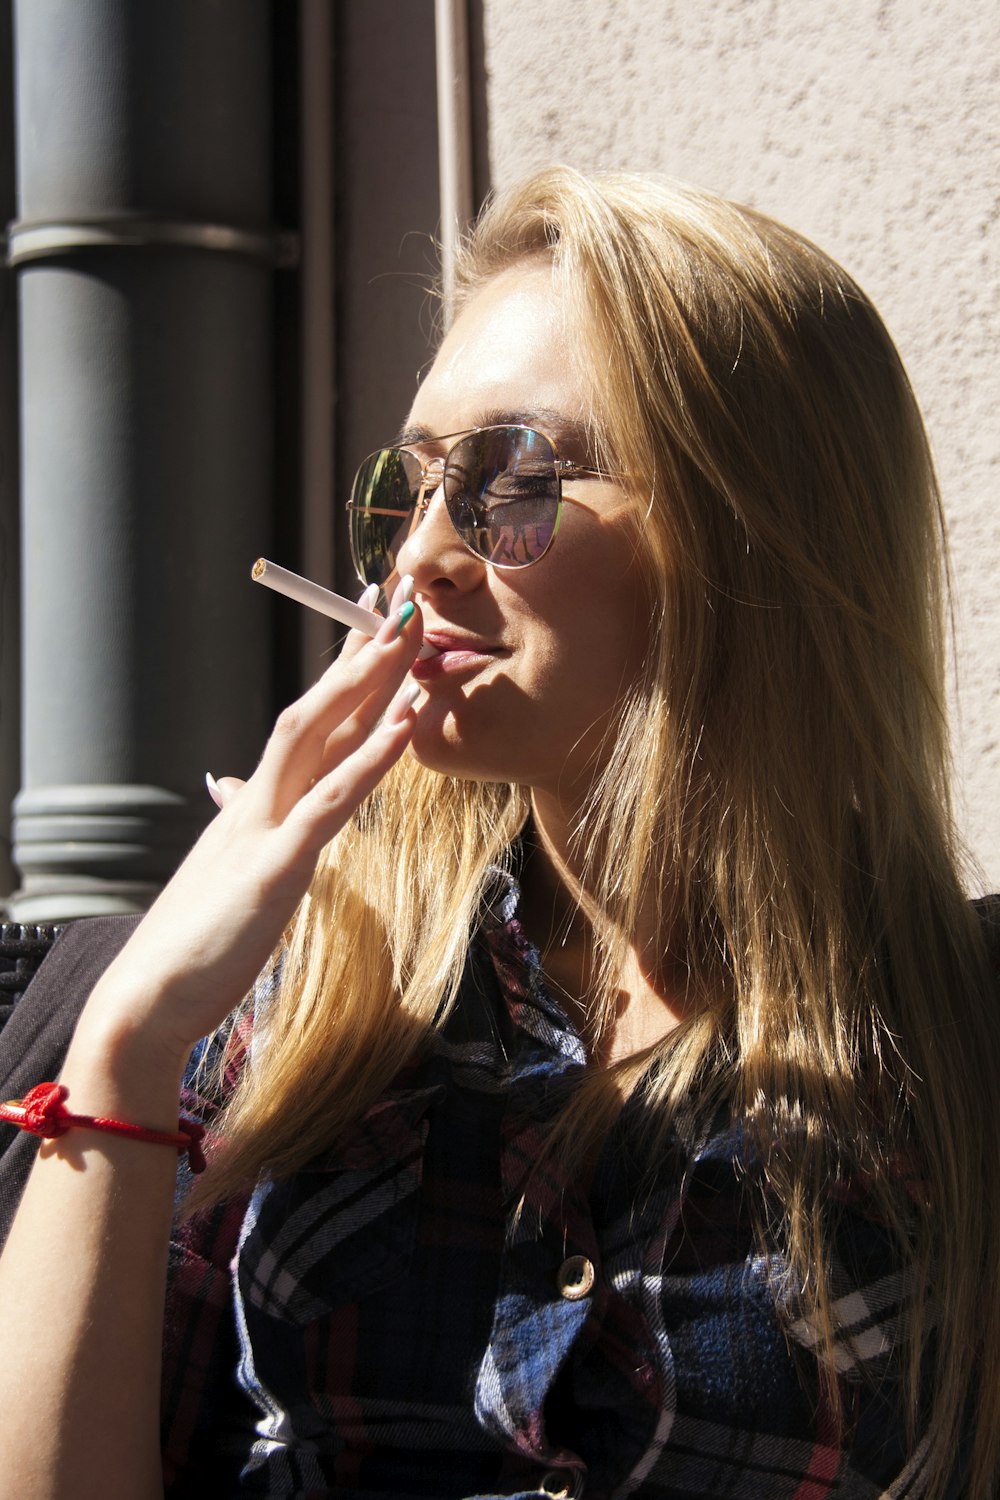 Cute Girl Smoking Pictures | Download Free Images on Unsplash